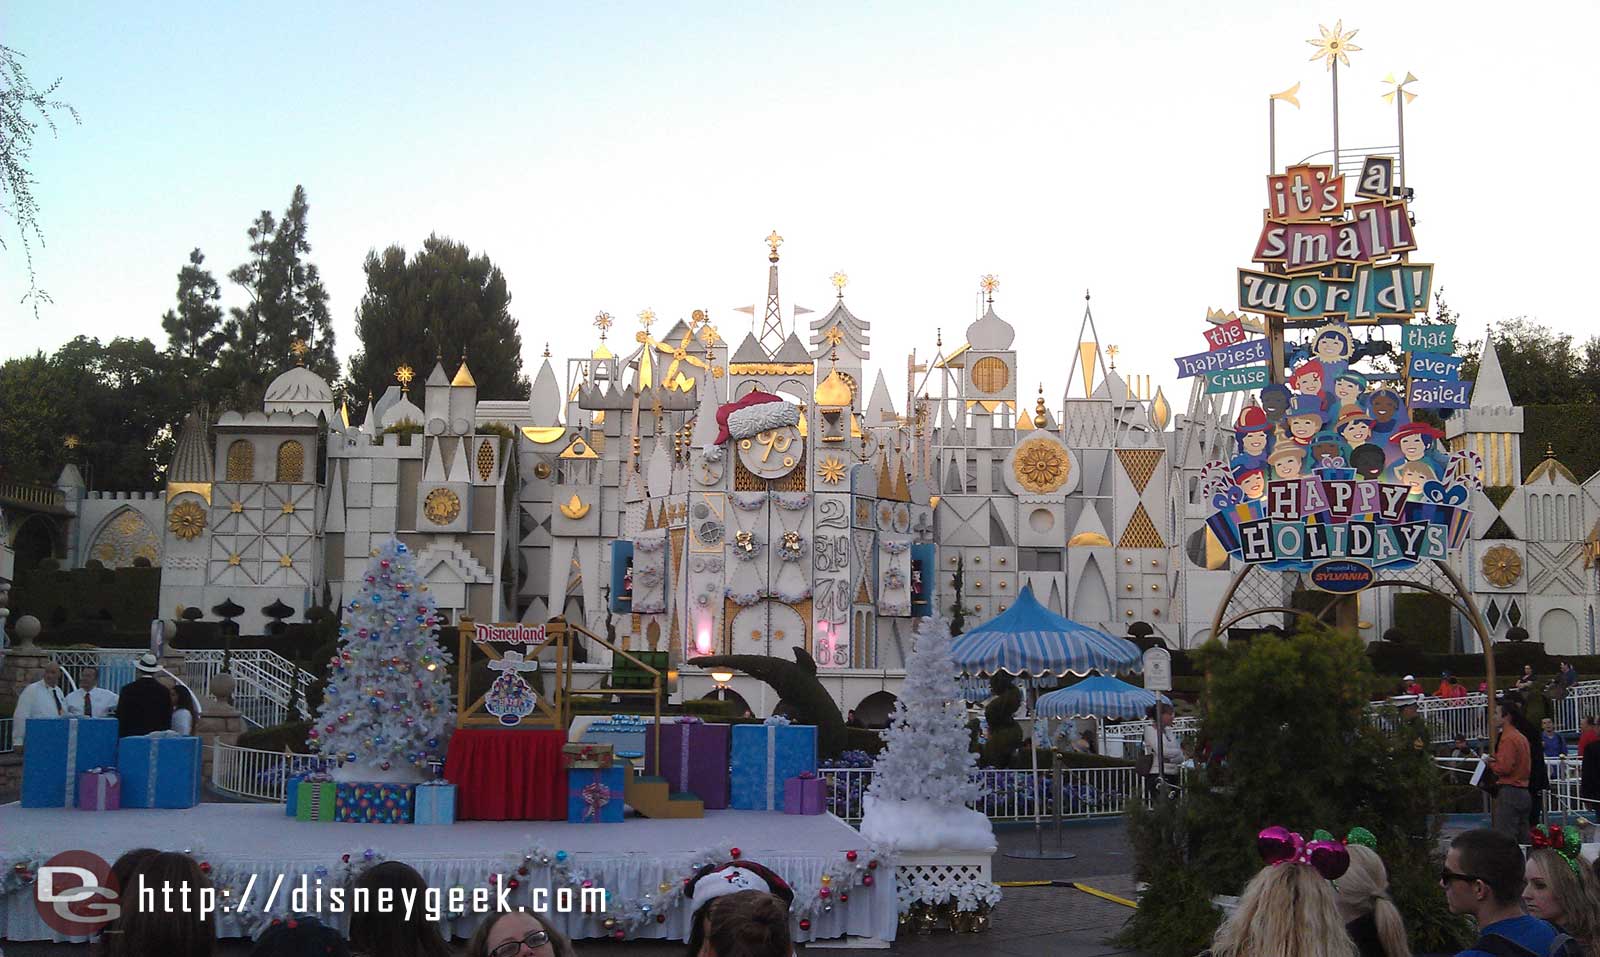 Waiting for the Small World lighting ceremony